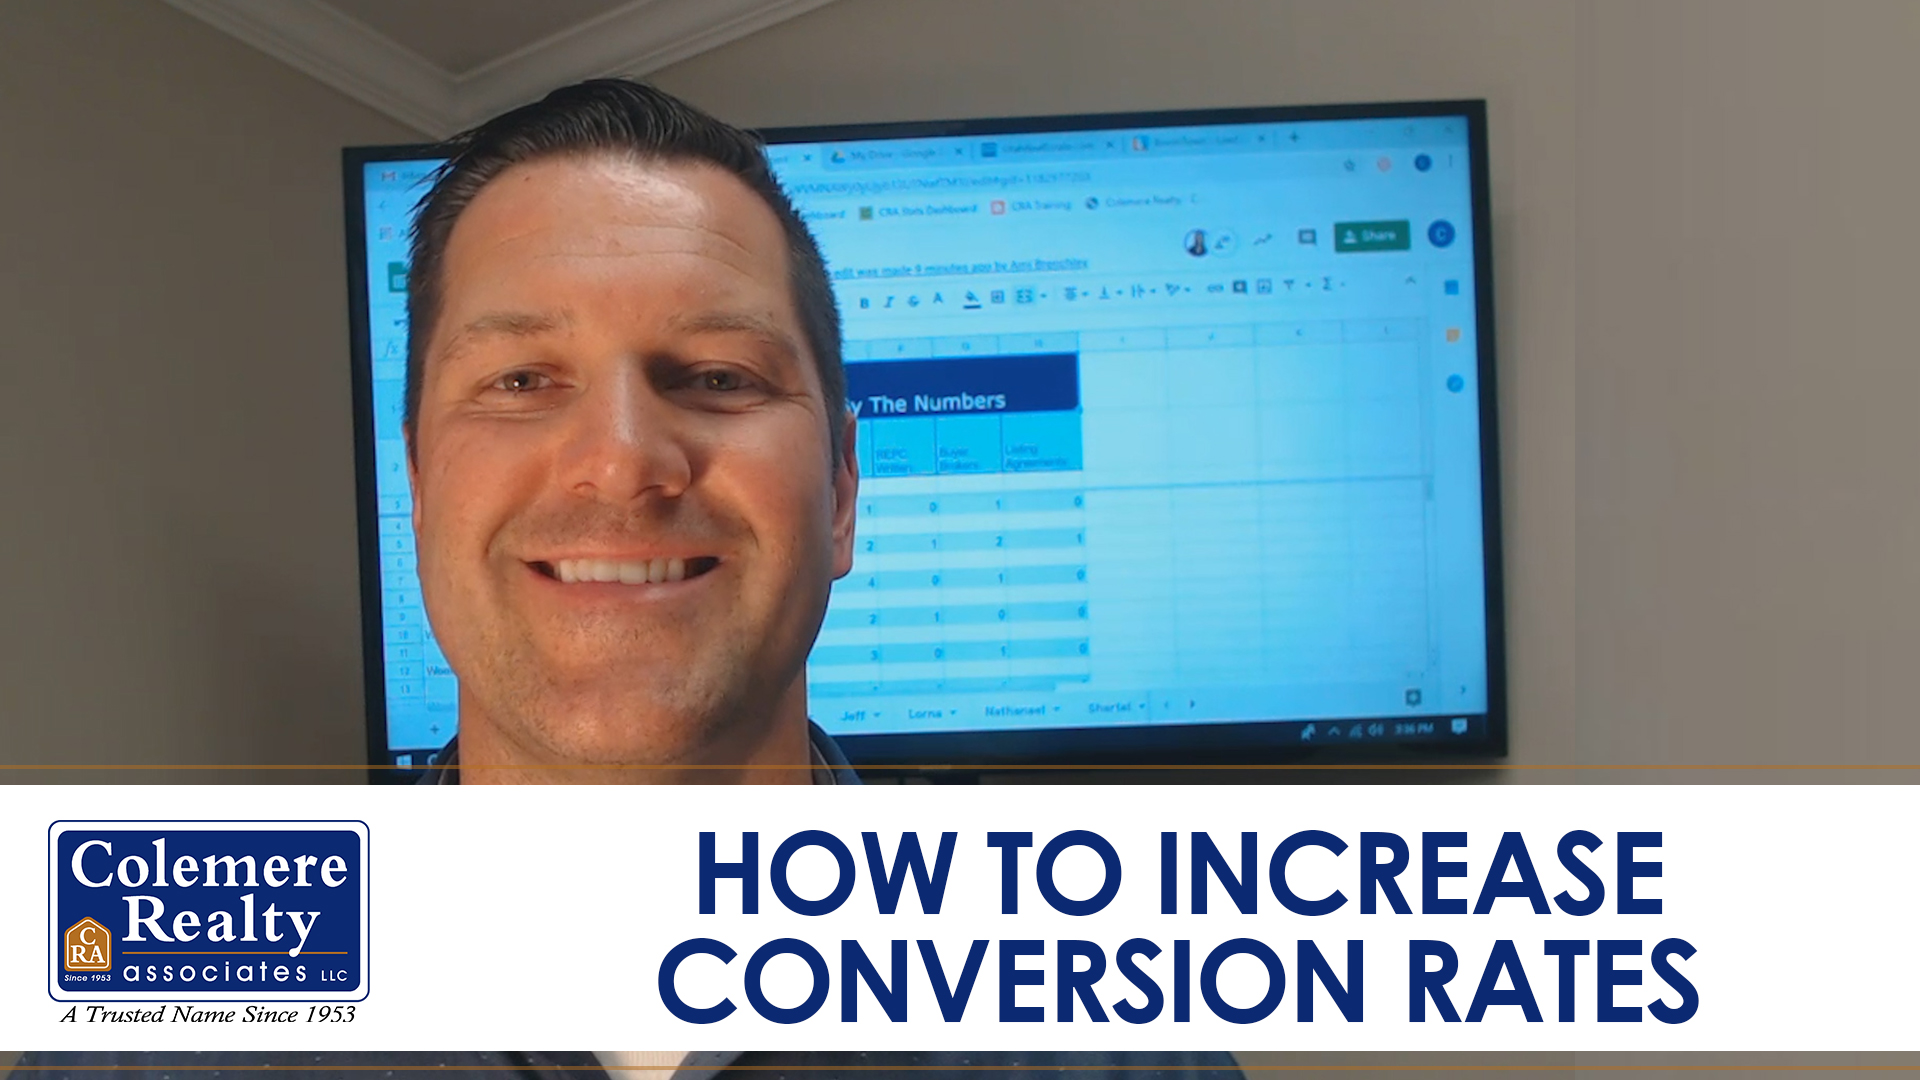 Best Practices for Increasing Your Conversion Rates